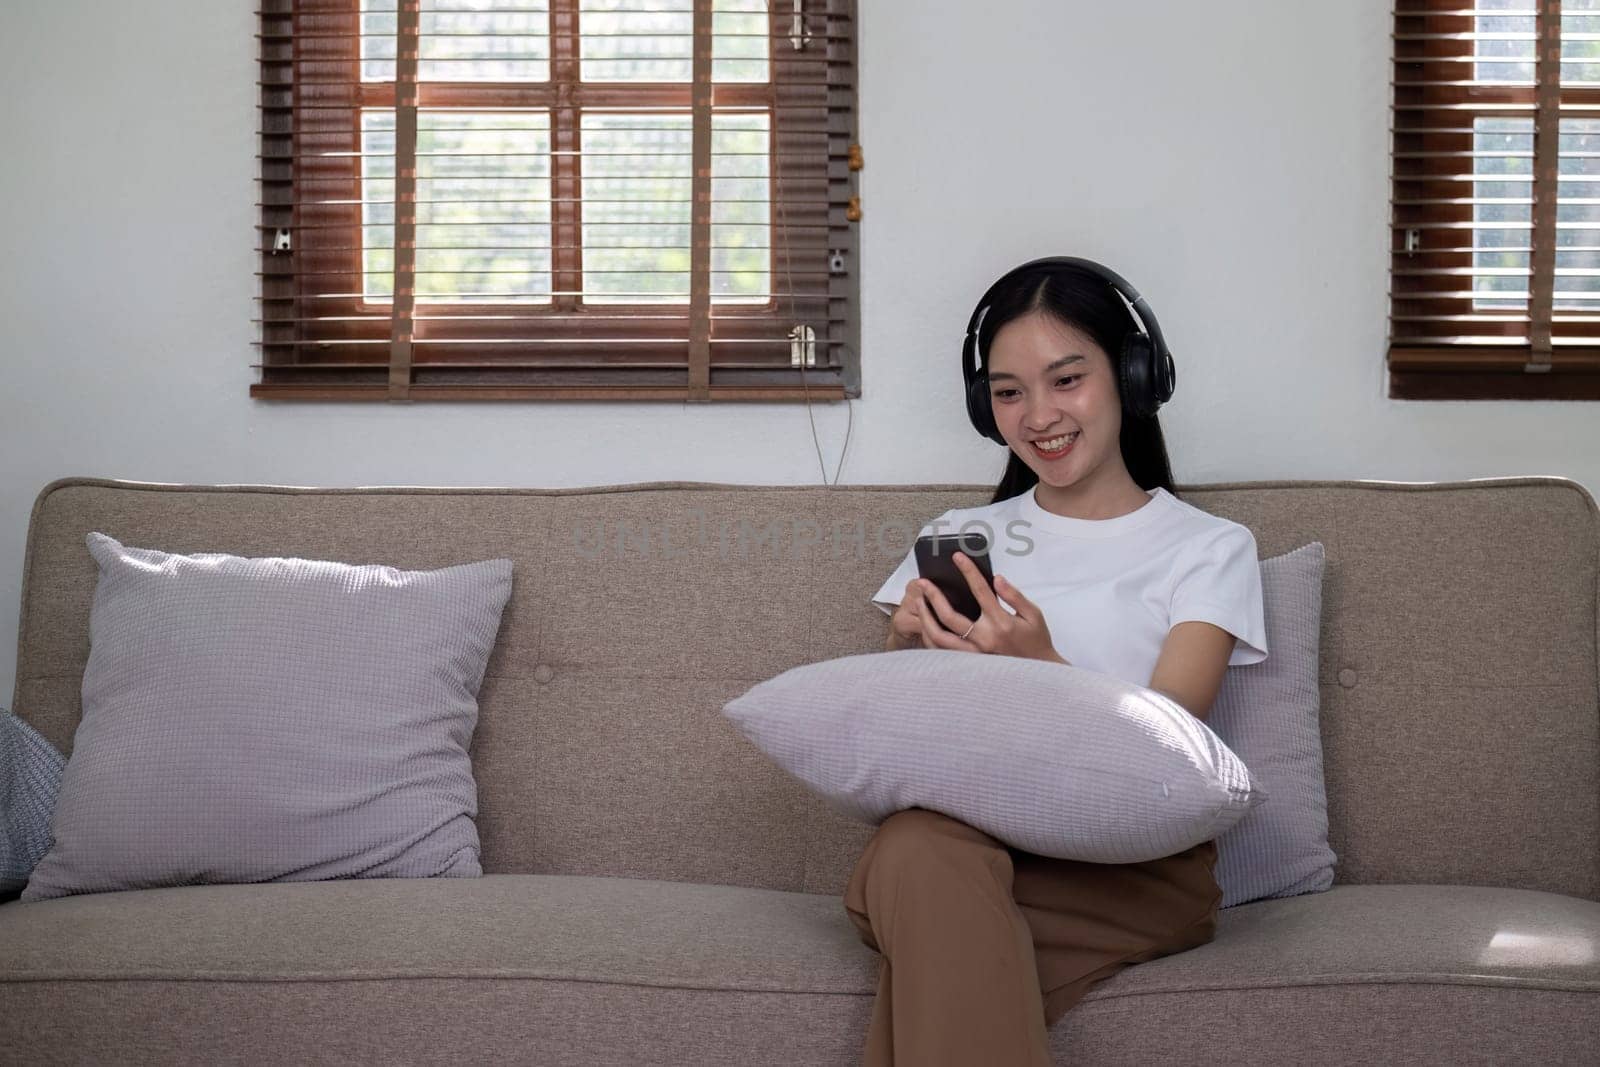 A woman sitting on a sofa, wearing headphones and using her smartphone, symbolizing modern relaxation and digital entertainment in a cozy home setting